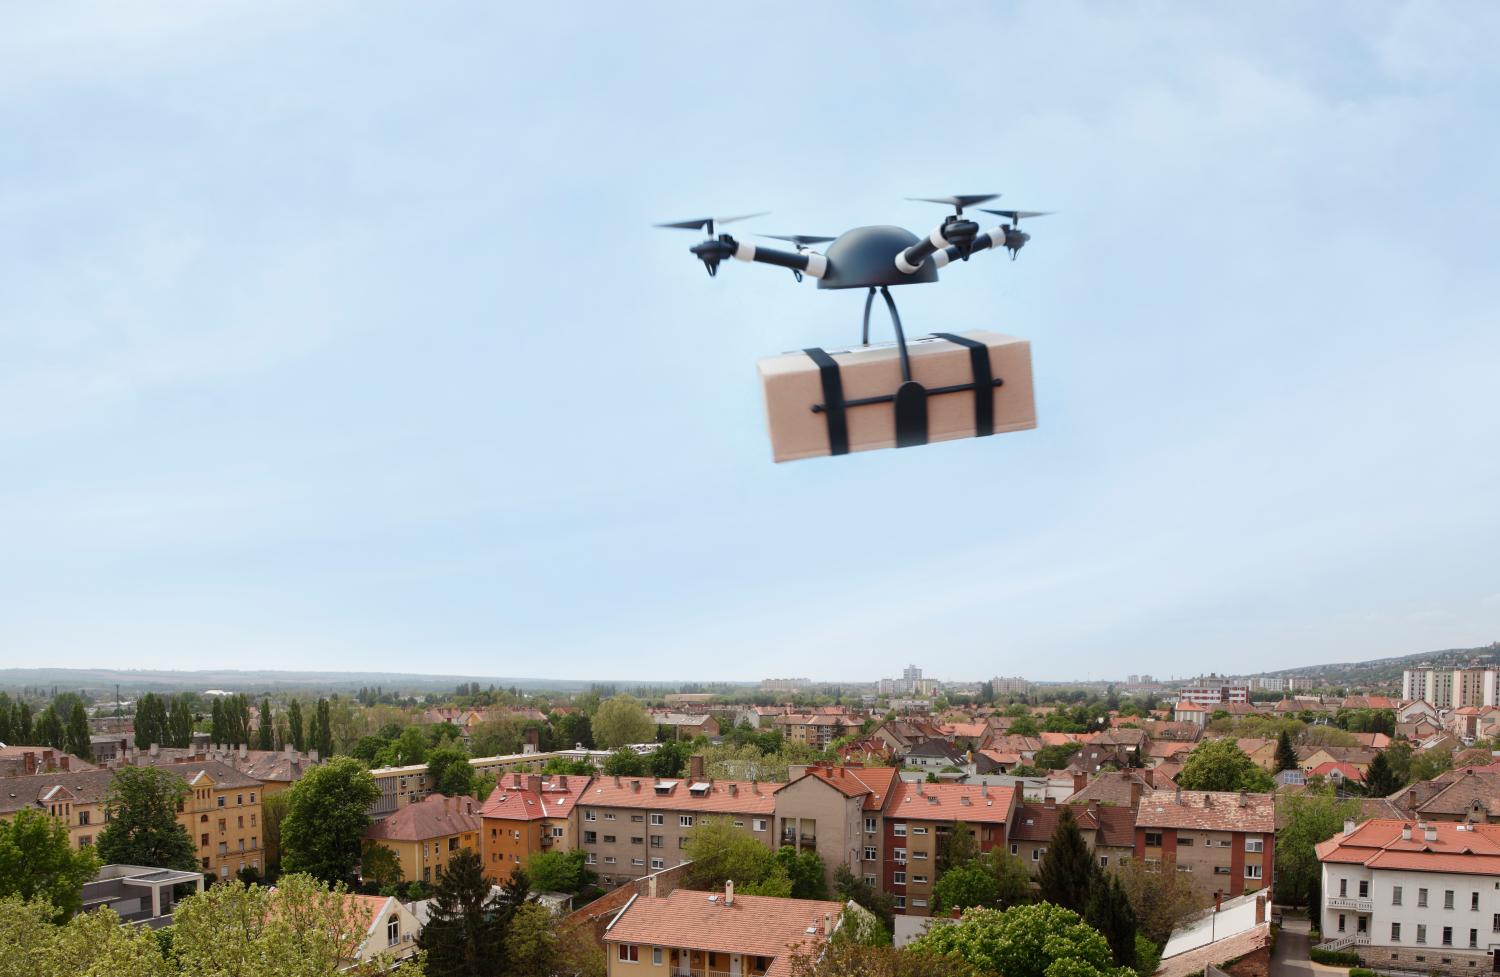 Delivery drone flying in city.IMPORTANT NOTICE:Drone made by me from households items exclusively for this image!